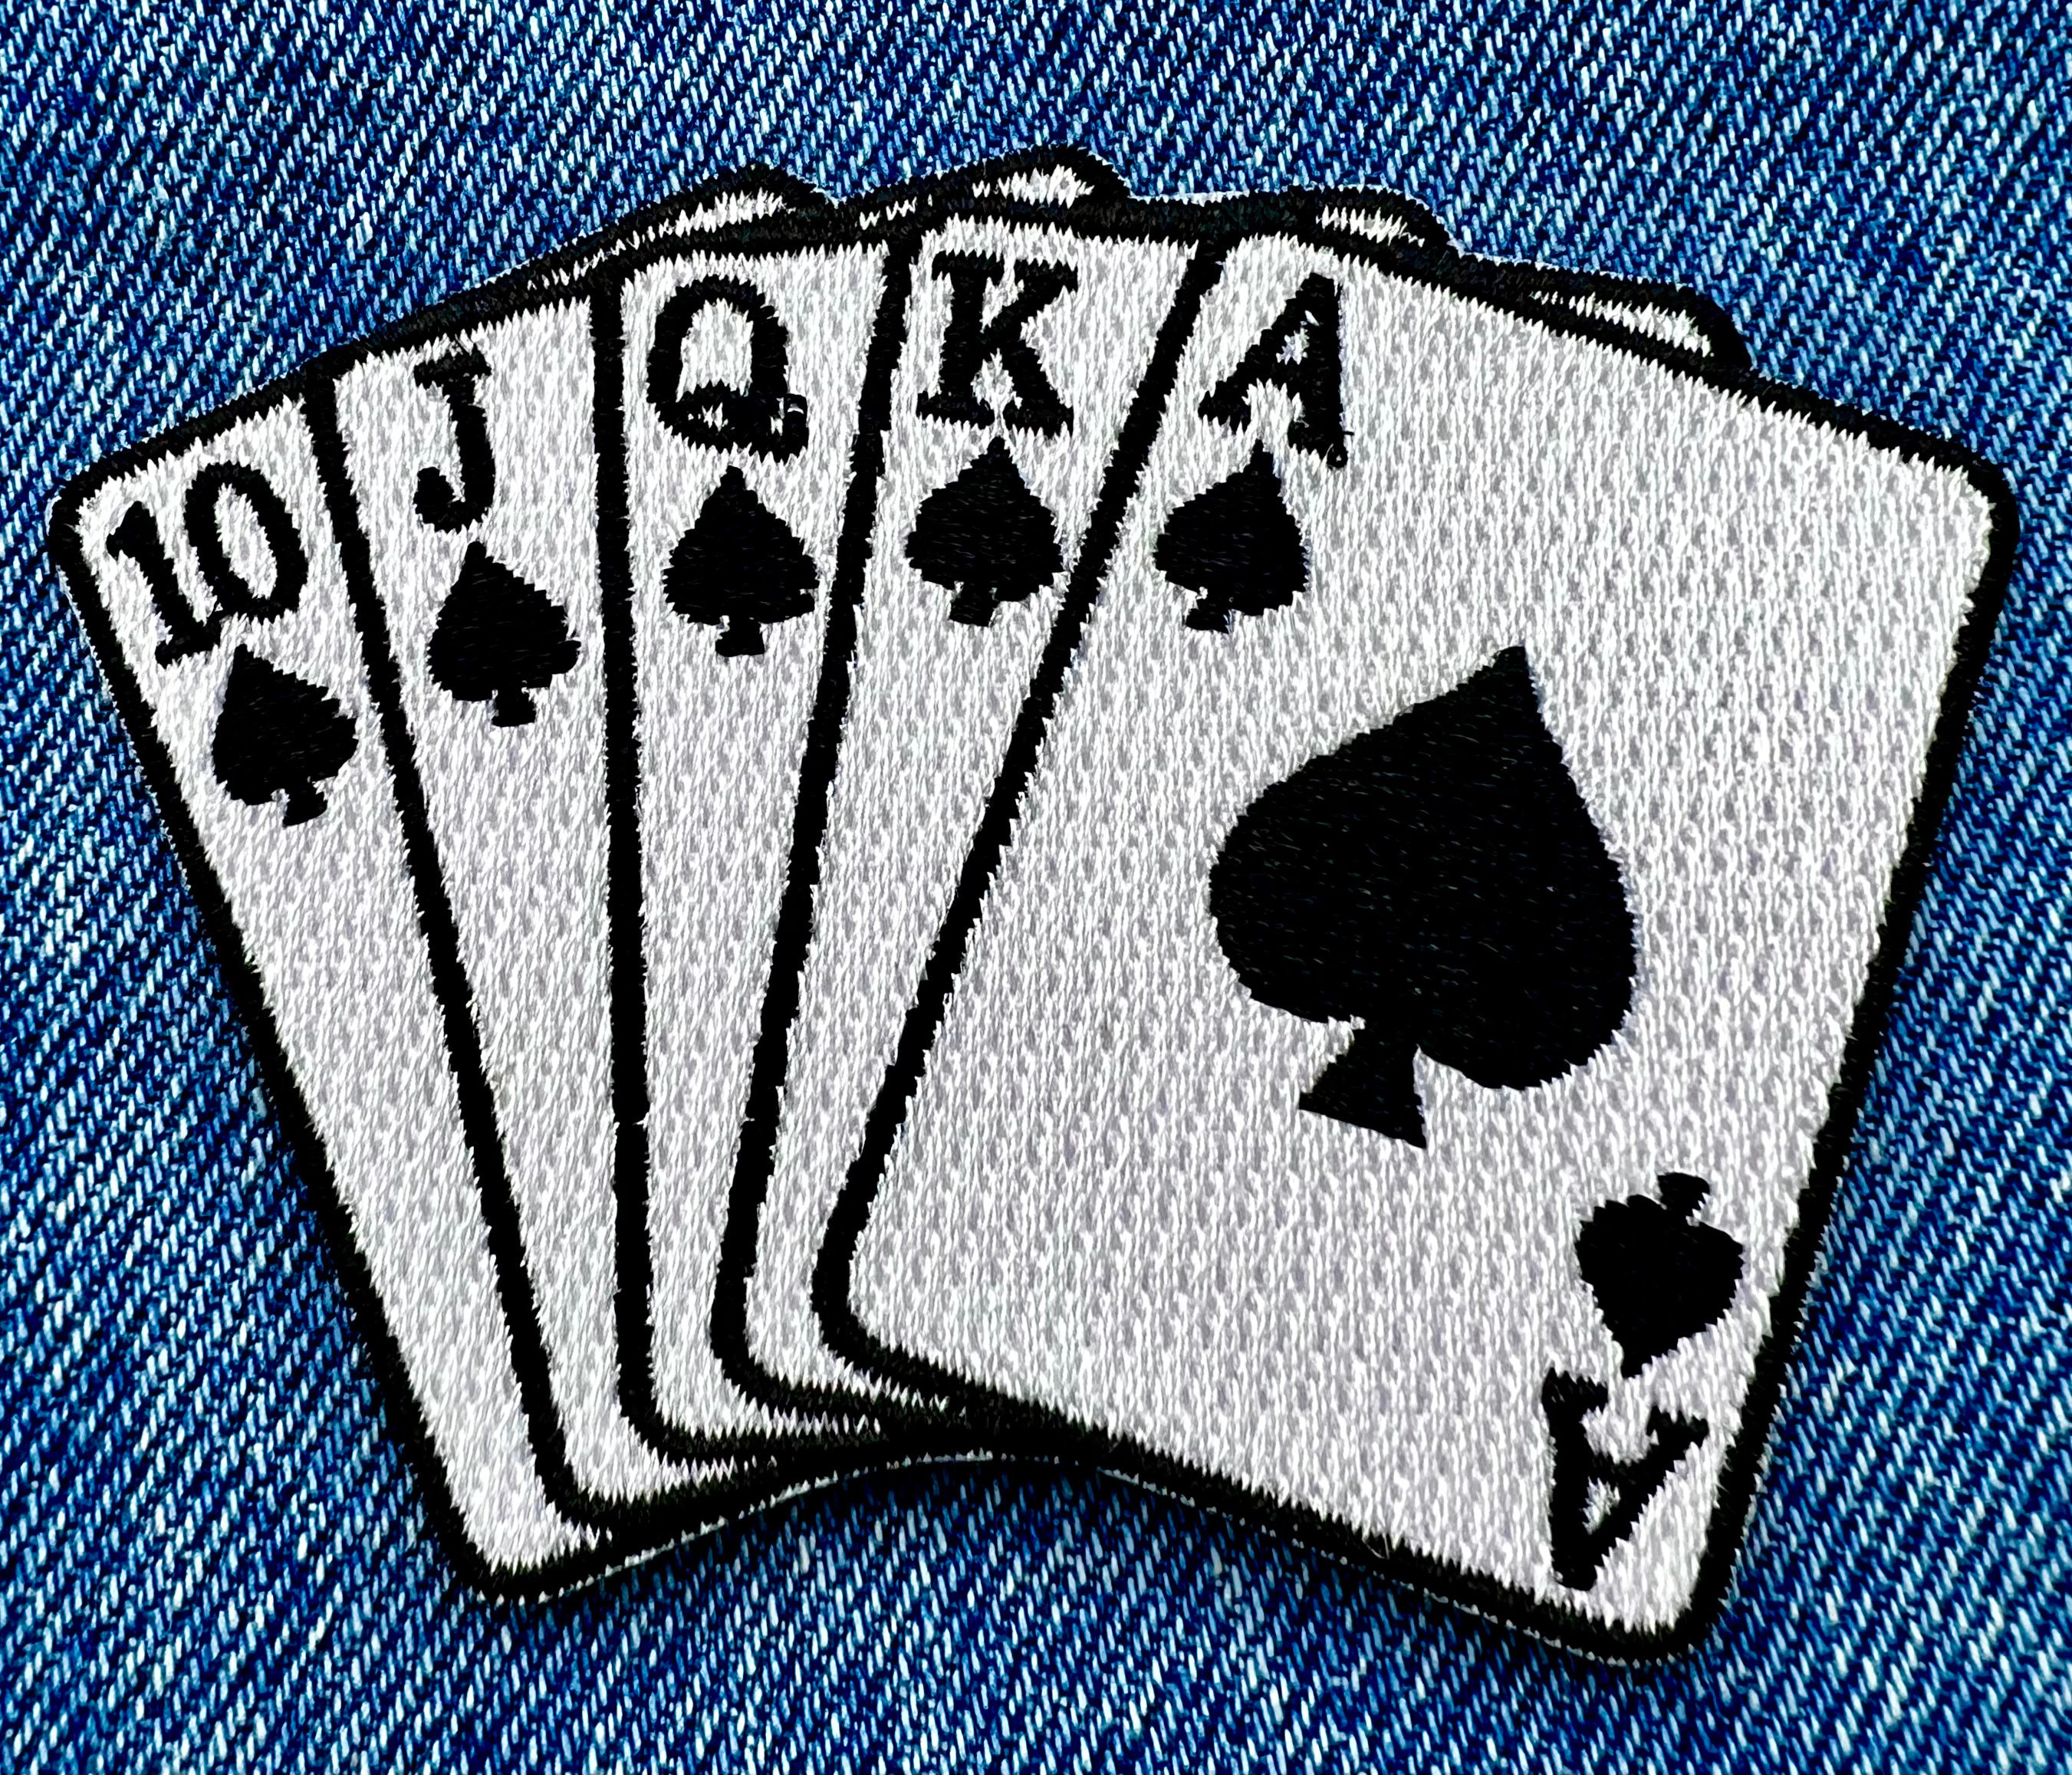  24 Pcs Playing Cards Patch Gaming Iron on Patches Halloween Red  Black Heart Patches Iron on Card Suits Diamonds Spades Patch Halloween  Poker Las Vegas Appliques for Jeans Hats Bags Clothing